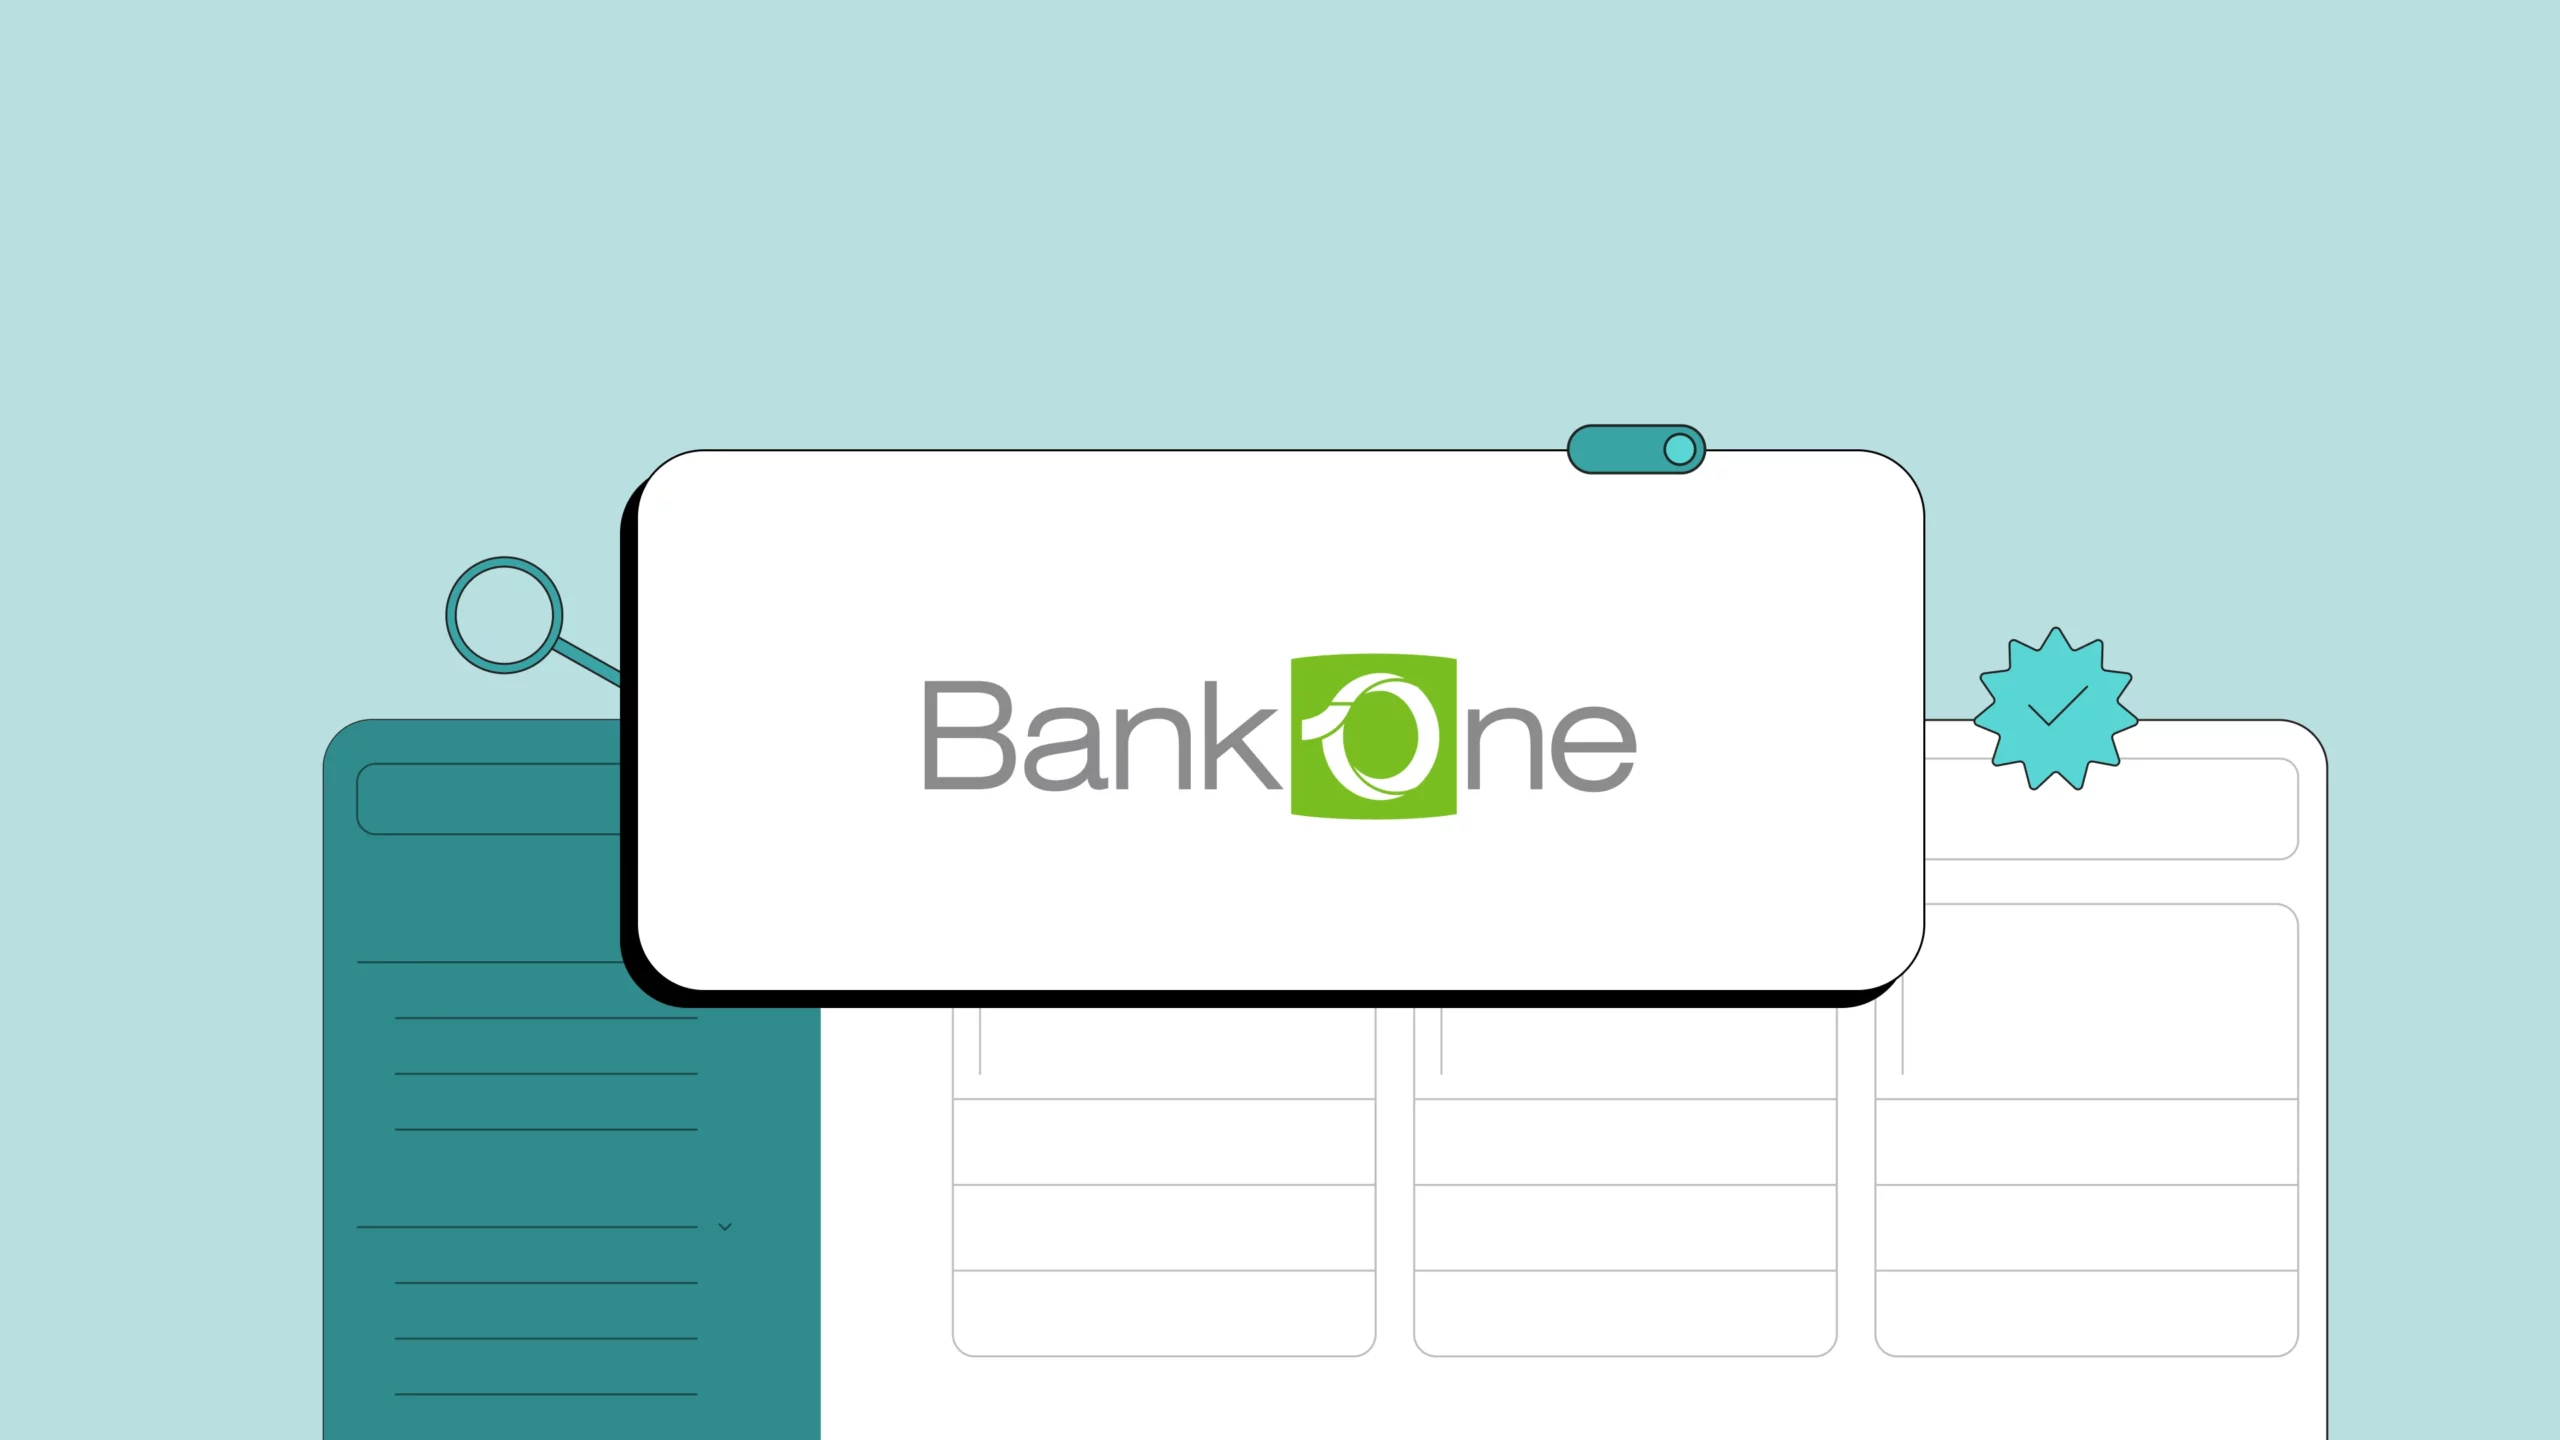 How to use BankOne with Lendsqr as a core banking